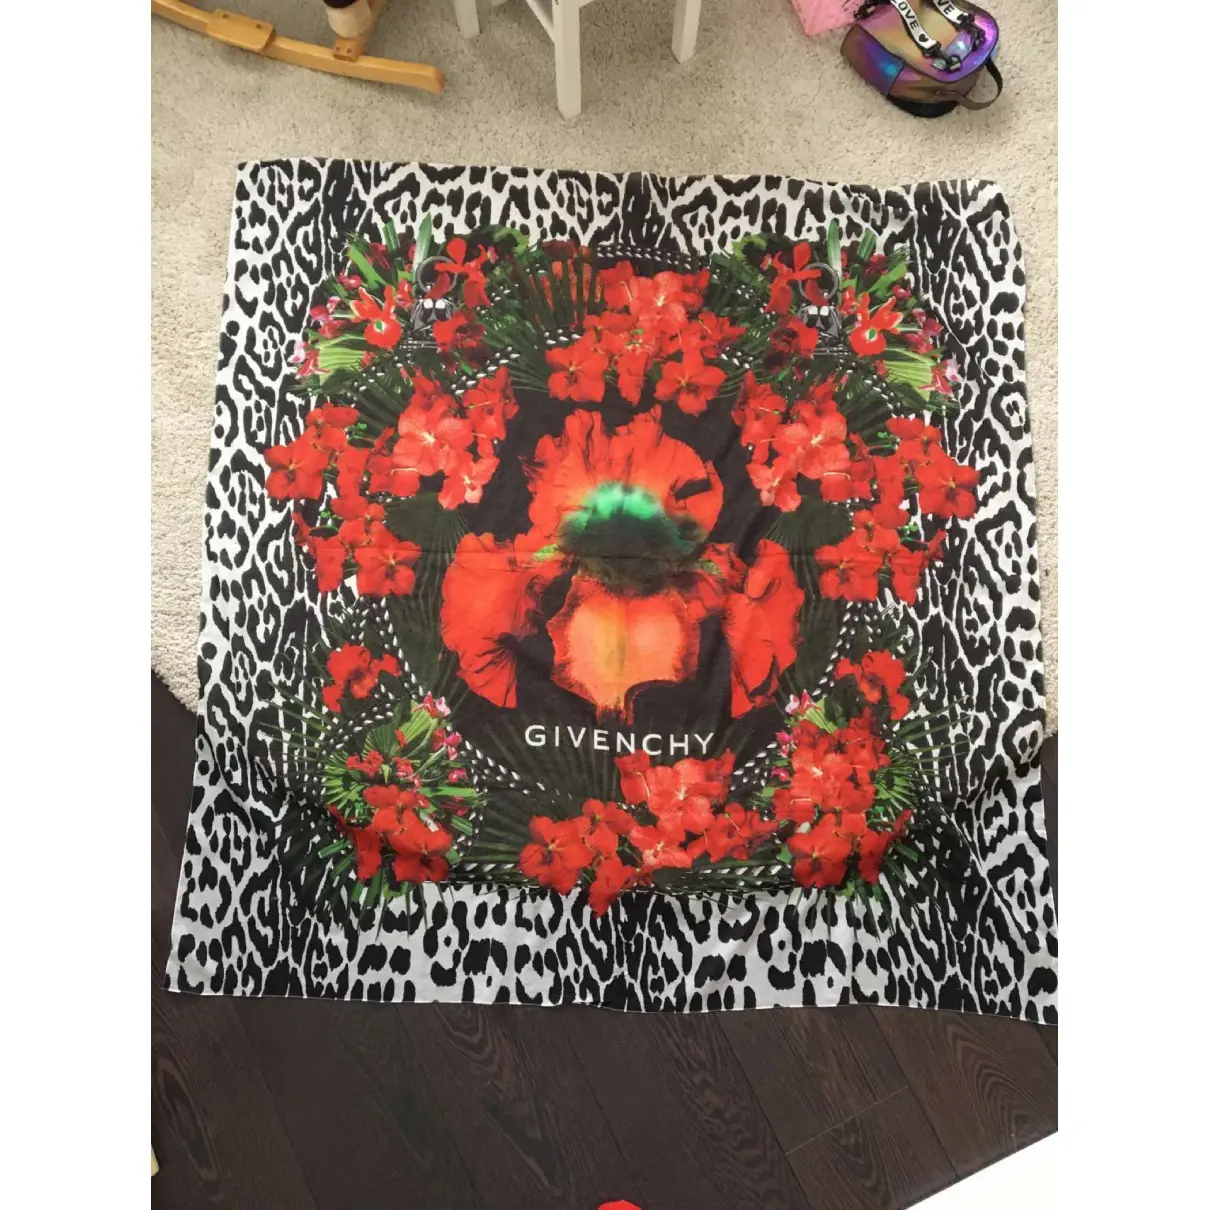 Buy Givenchy Scarf online